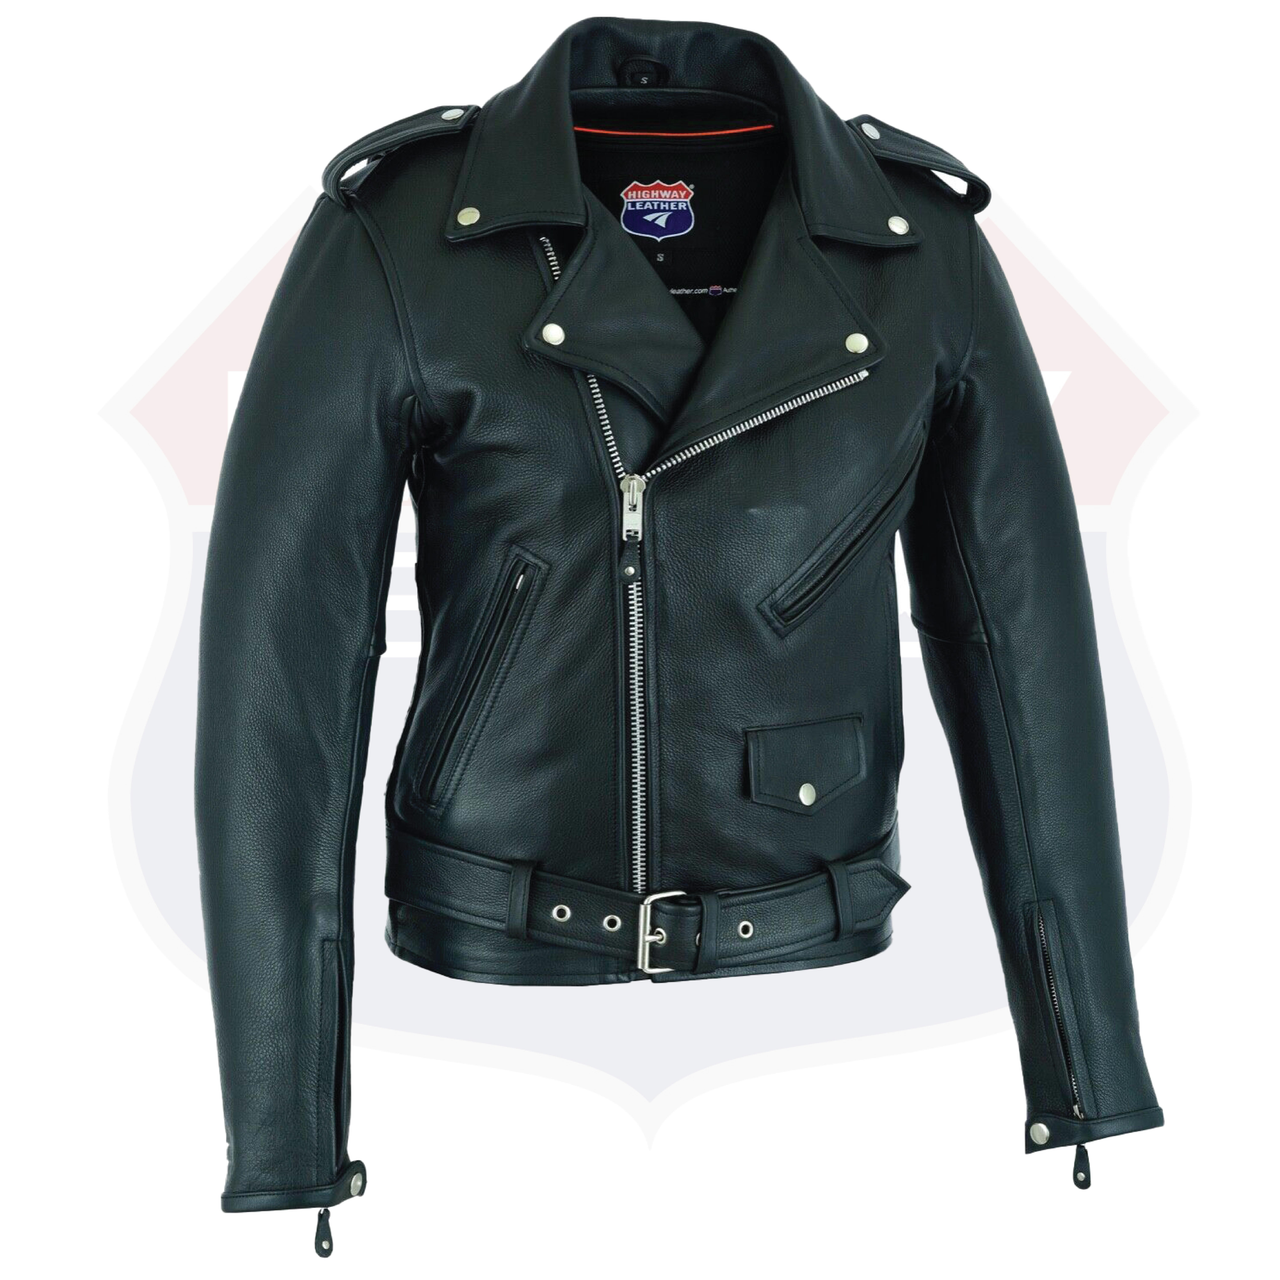 HL10200 Classic MC Leather Jacket with Plain sides - HighwayLeather